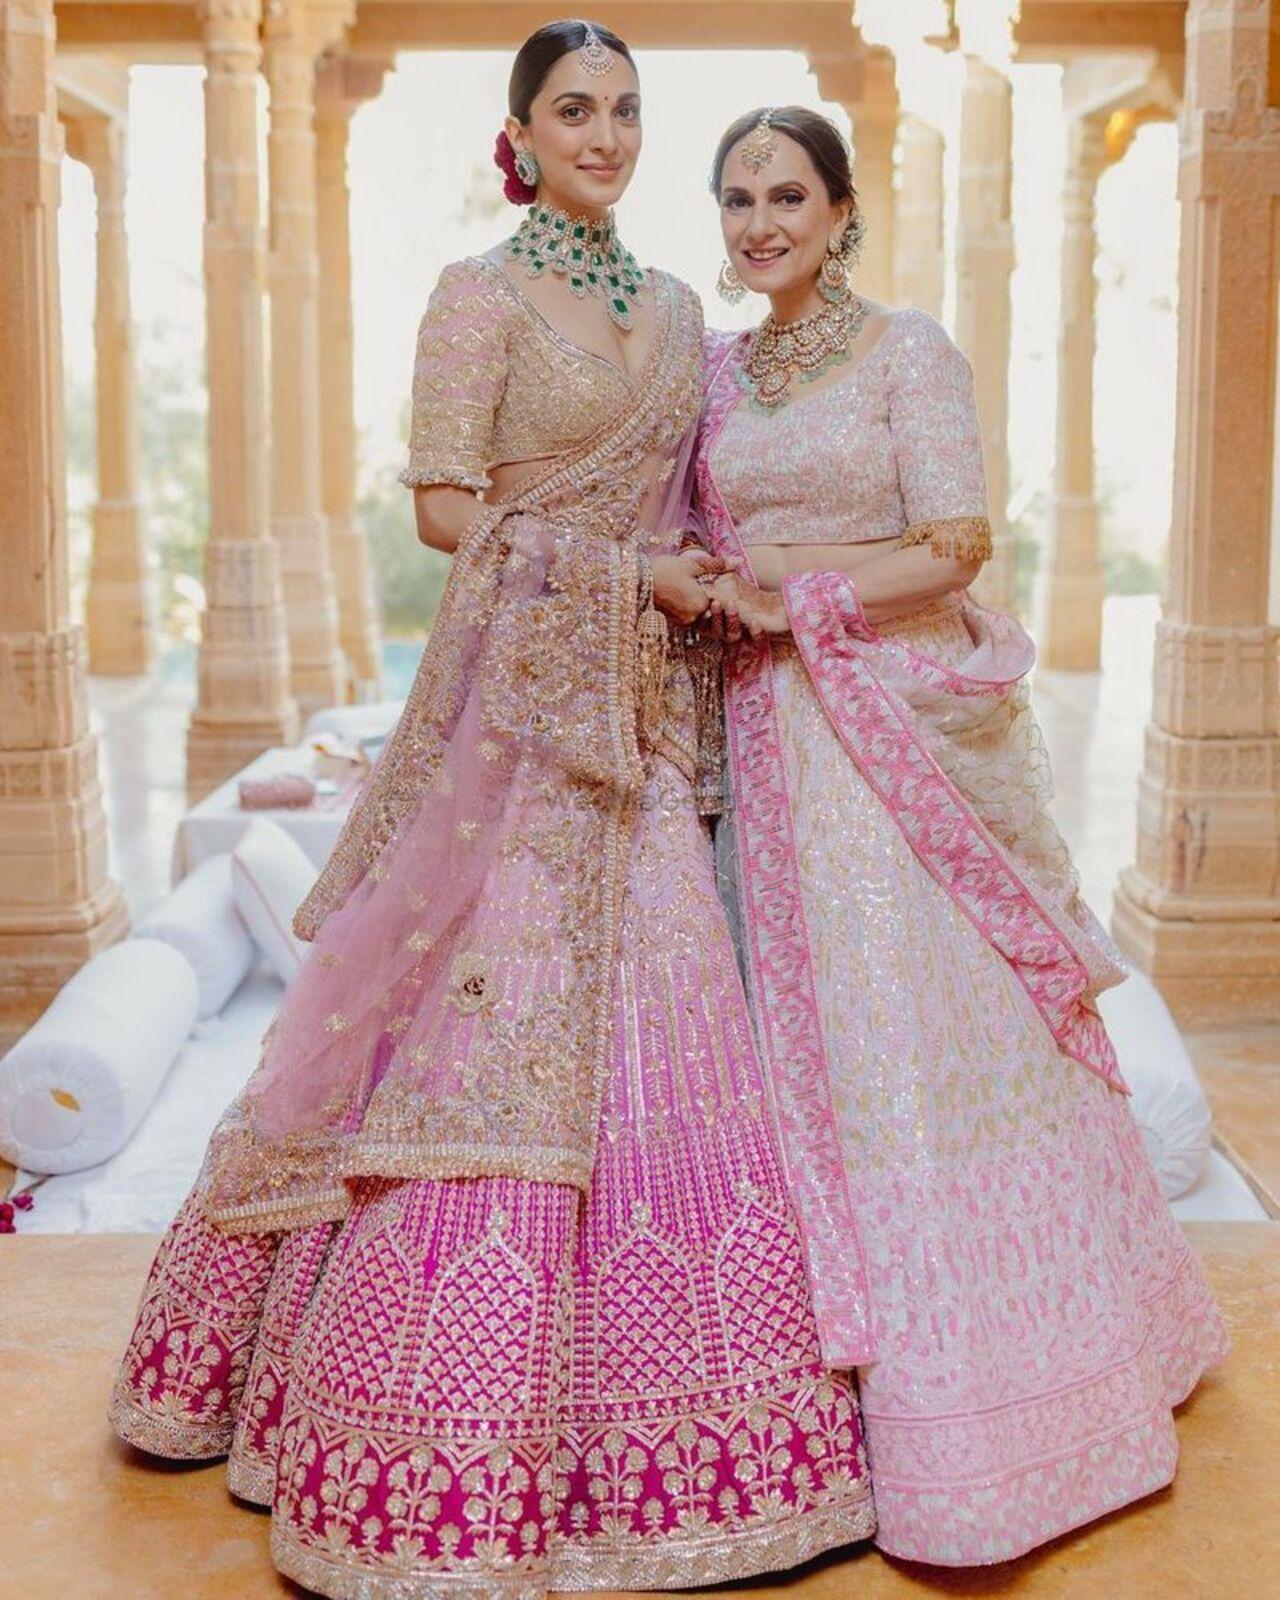 Kiara Advani pulls off Manish Malhotra's outfits perfectly, and even opted for a bridal lehenga by his label for her wedding to Sidharth Malhotra. The lehenga showcased a gradient of light pink with darker borders, a hue which Manish Malhotra aptly termed as 'empress pink'. The design draws inspiration from Roman architecture, reflecting the newlyweds' shared affection for the city renowned for its domes. The intricate embroidery is accentuated by genuine Swarovski crystals, adding a radiant sparkle. Kiara also made a modern fashion statement by opting for emerald studs instead of traditional wedding danglers